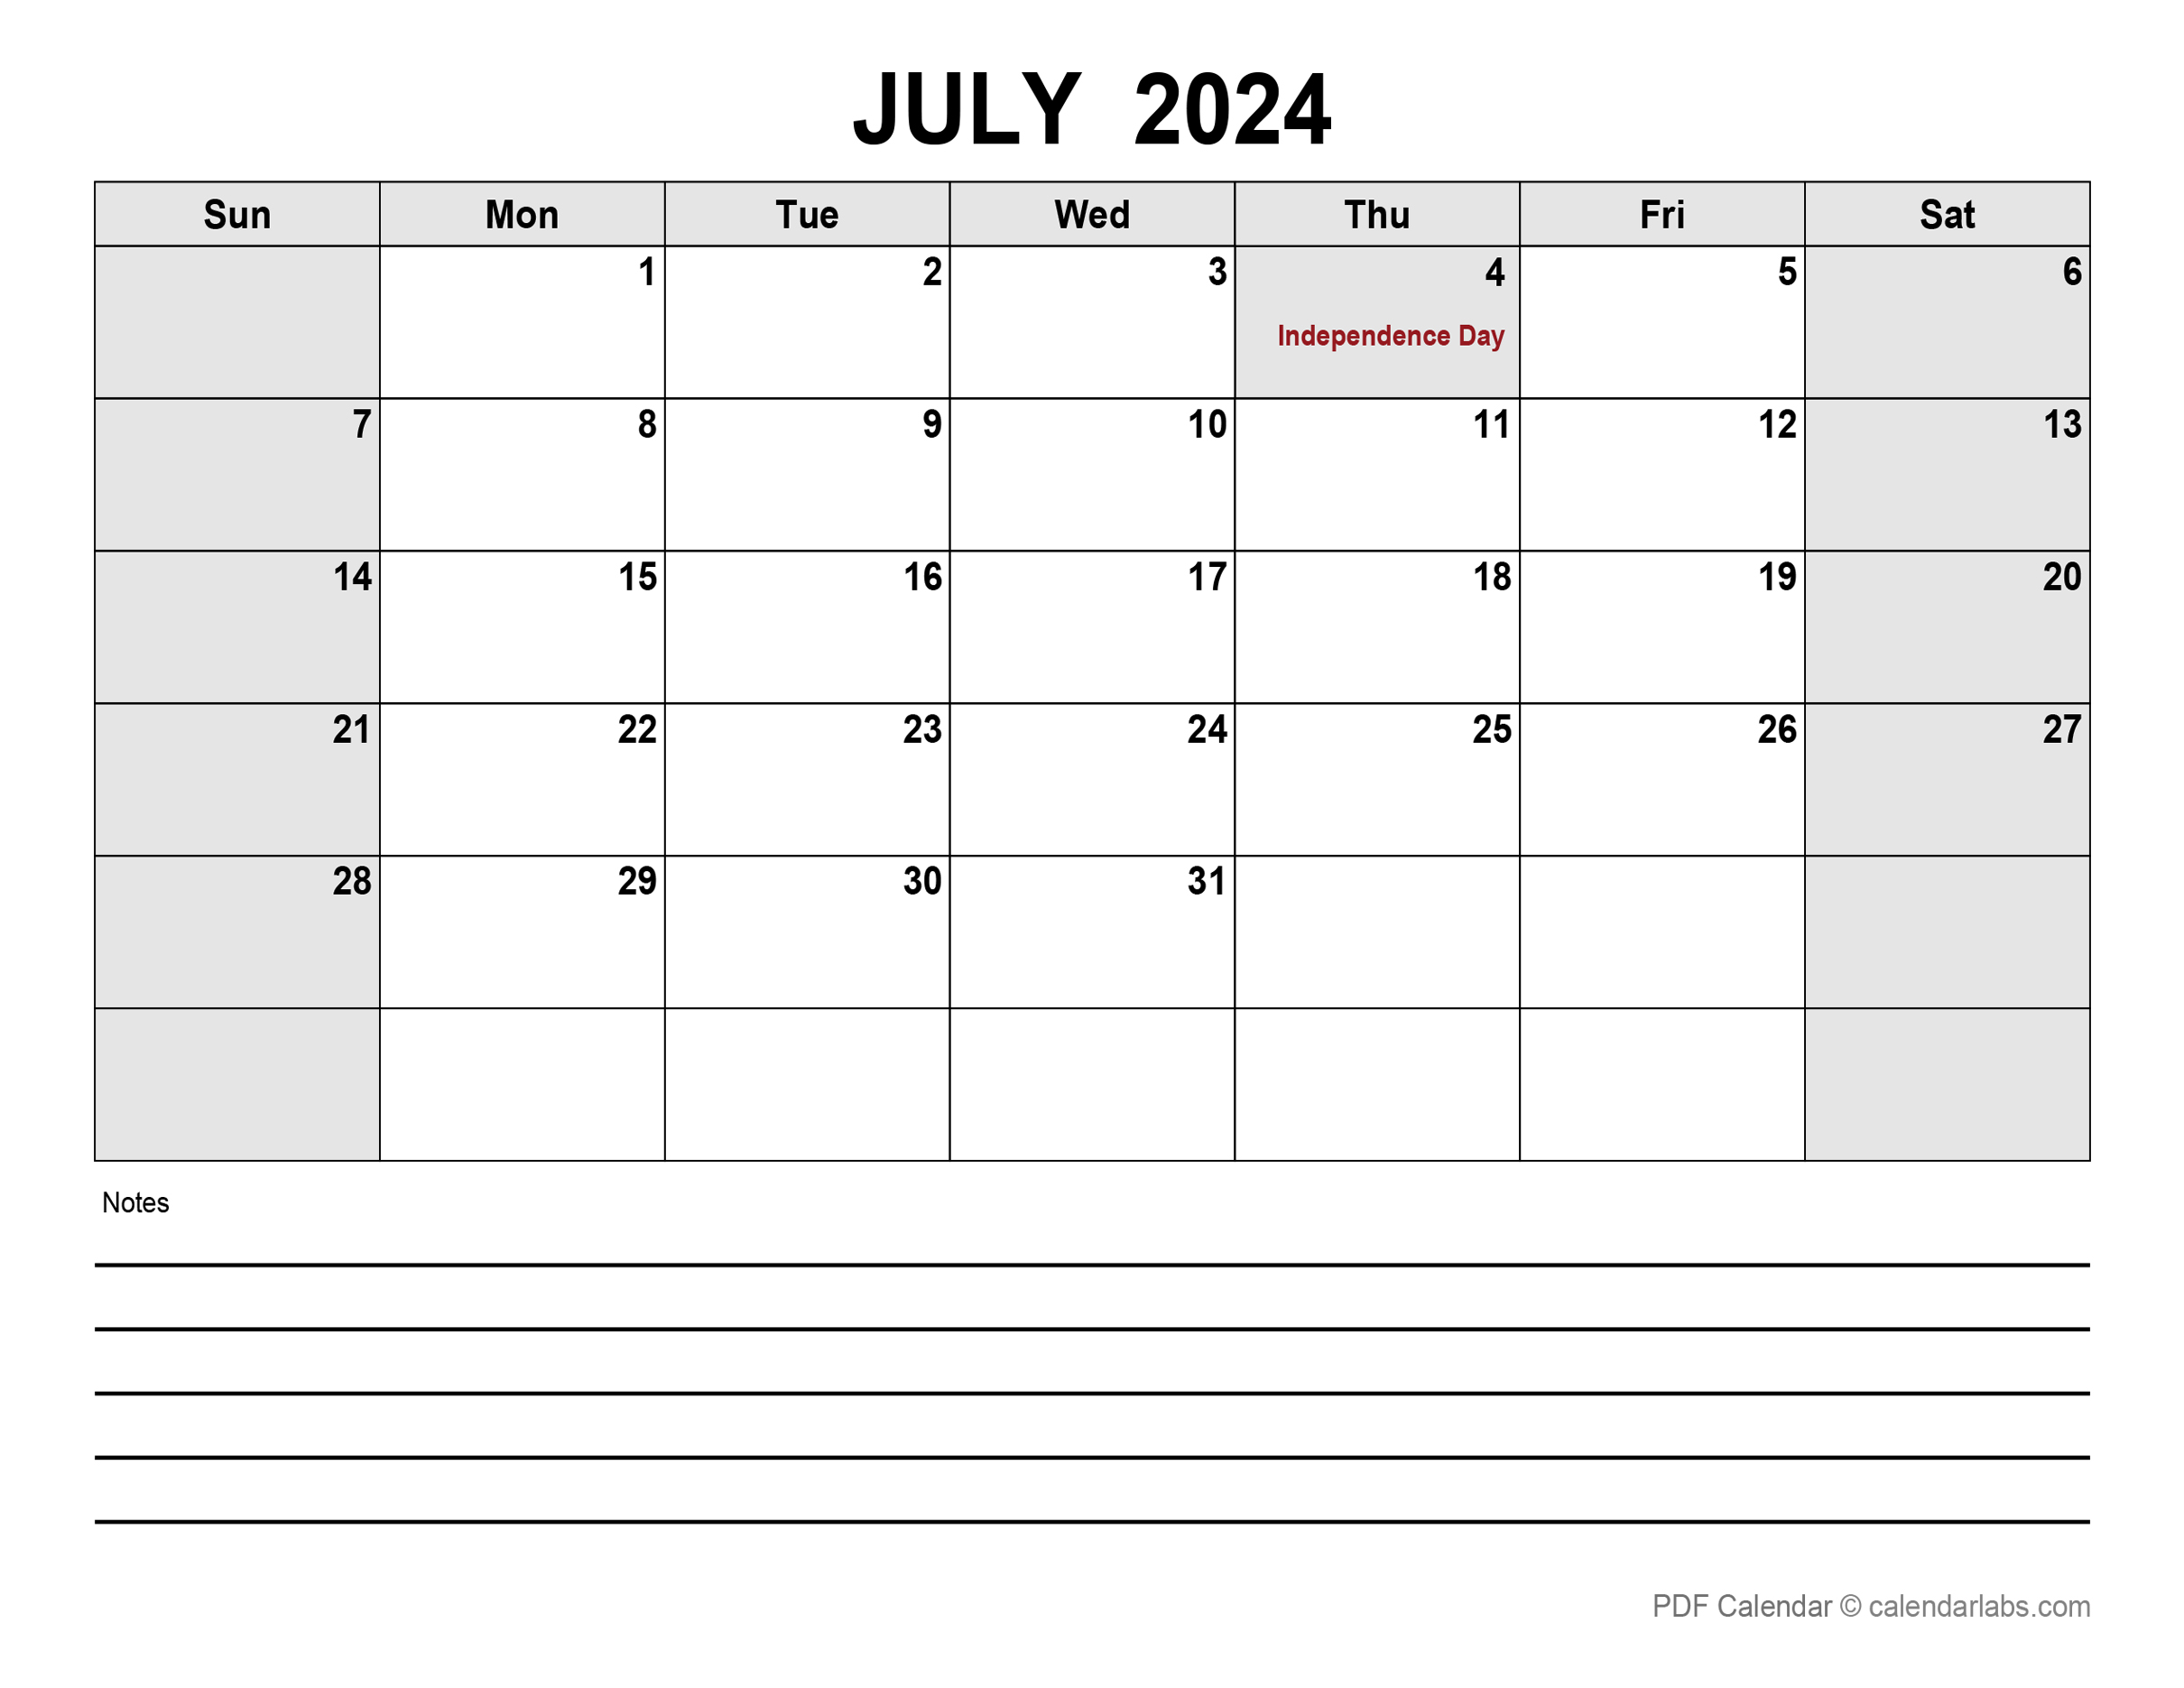 july-2024-calendar-with-holidays-calendarlabs